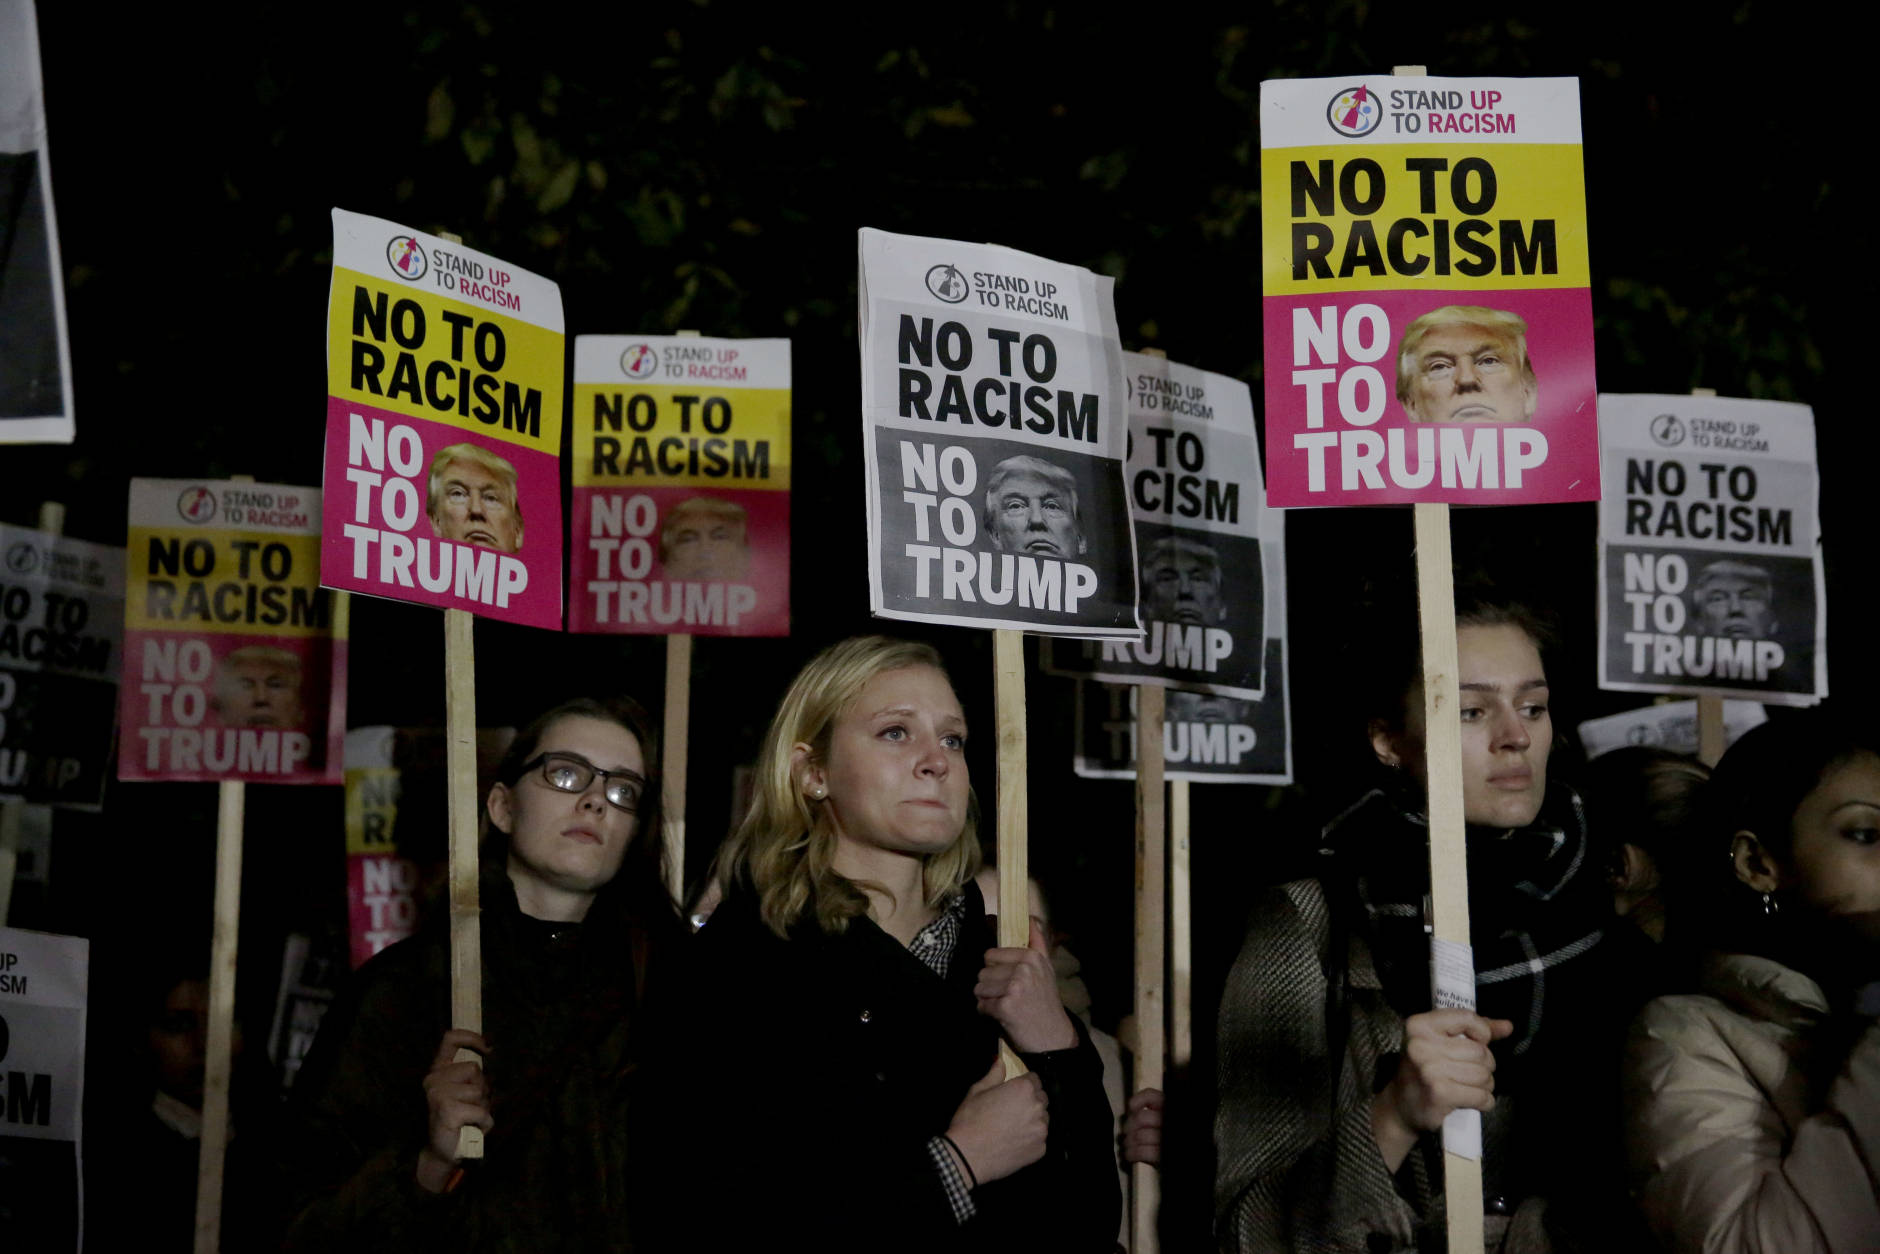 People hold placards as they take part in an anti-racism protest against President-elect Donald Trump winning the American election, outside the U.S. embassy in London, Wednesday, Nov. 9, 2016. Democratic presidential candidate Hillary Clinton conceded her defeat to Republican Donald Trump after the hard-fought presidential election. (AP Photo/Matt Dunham)